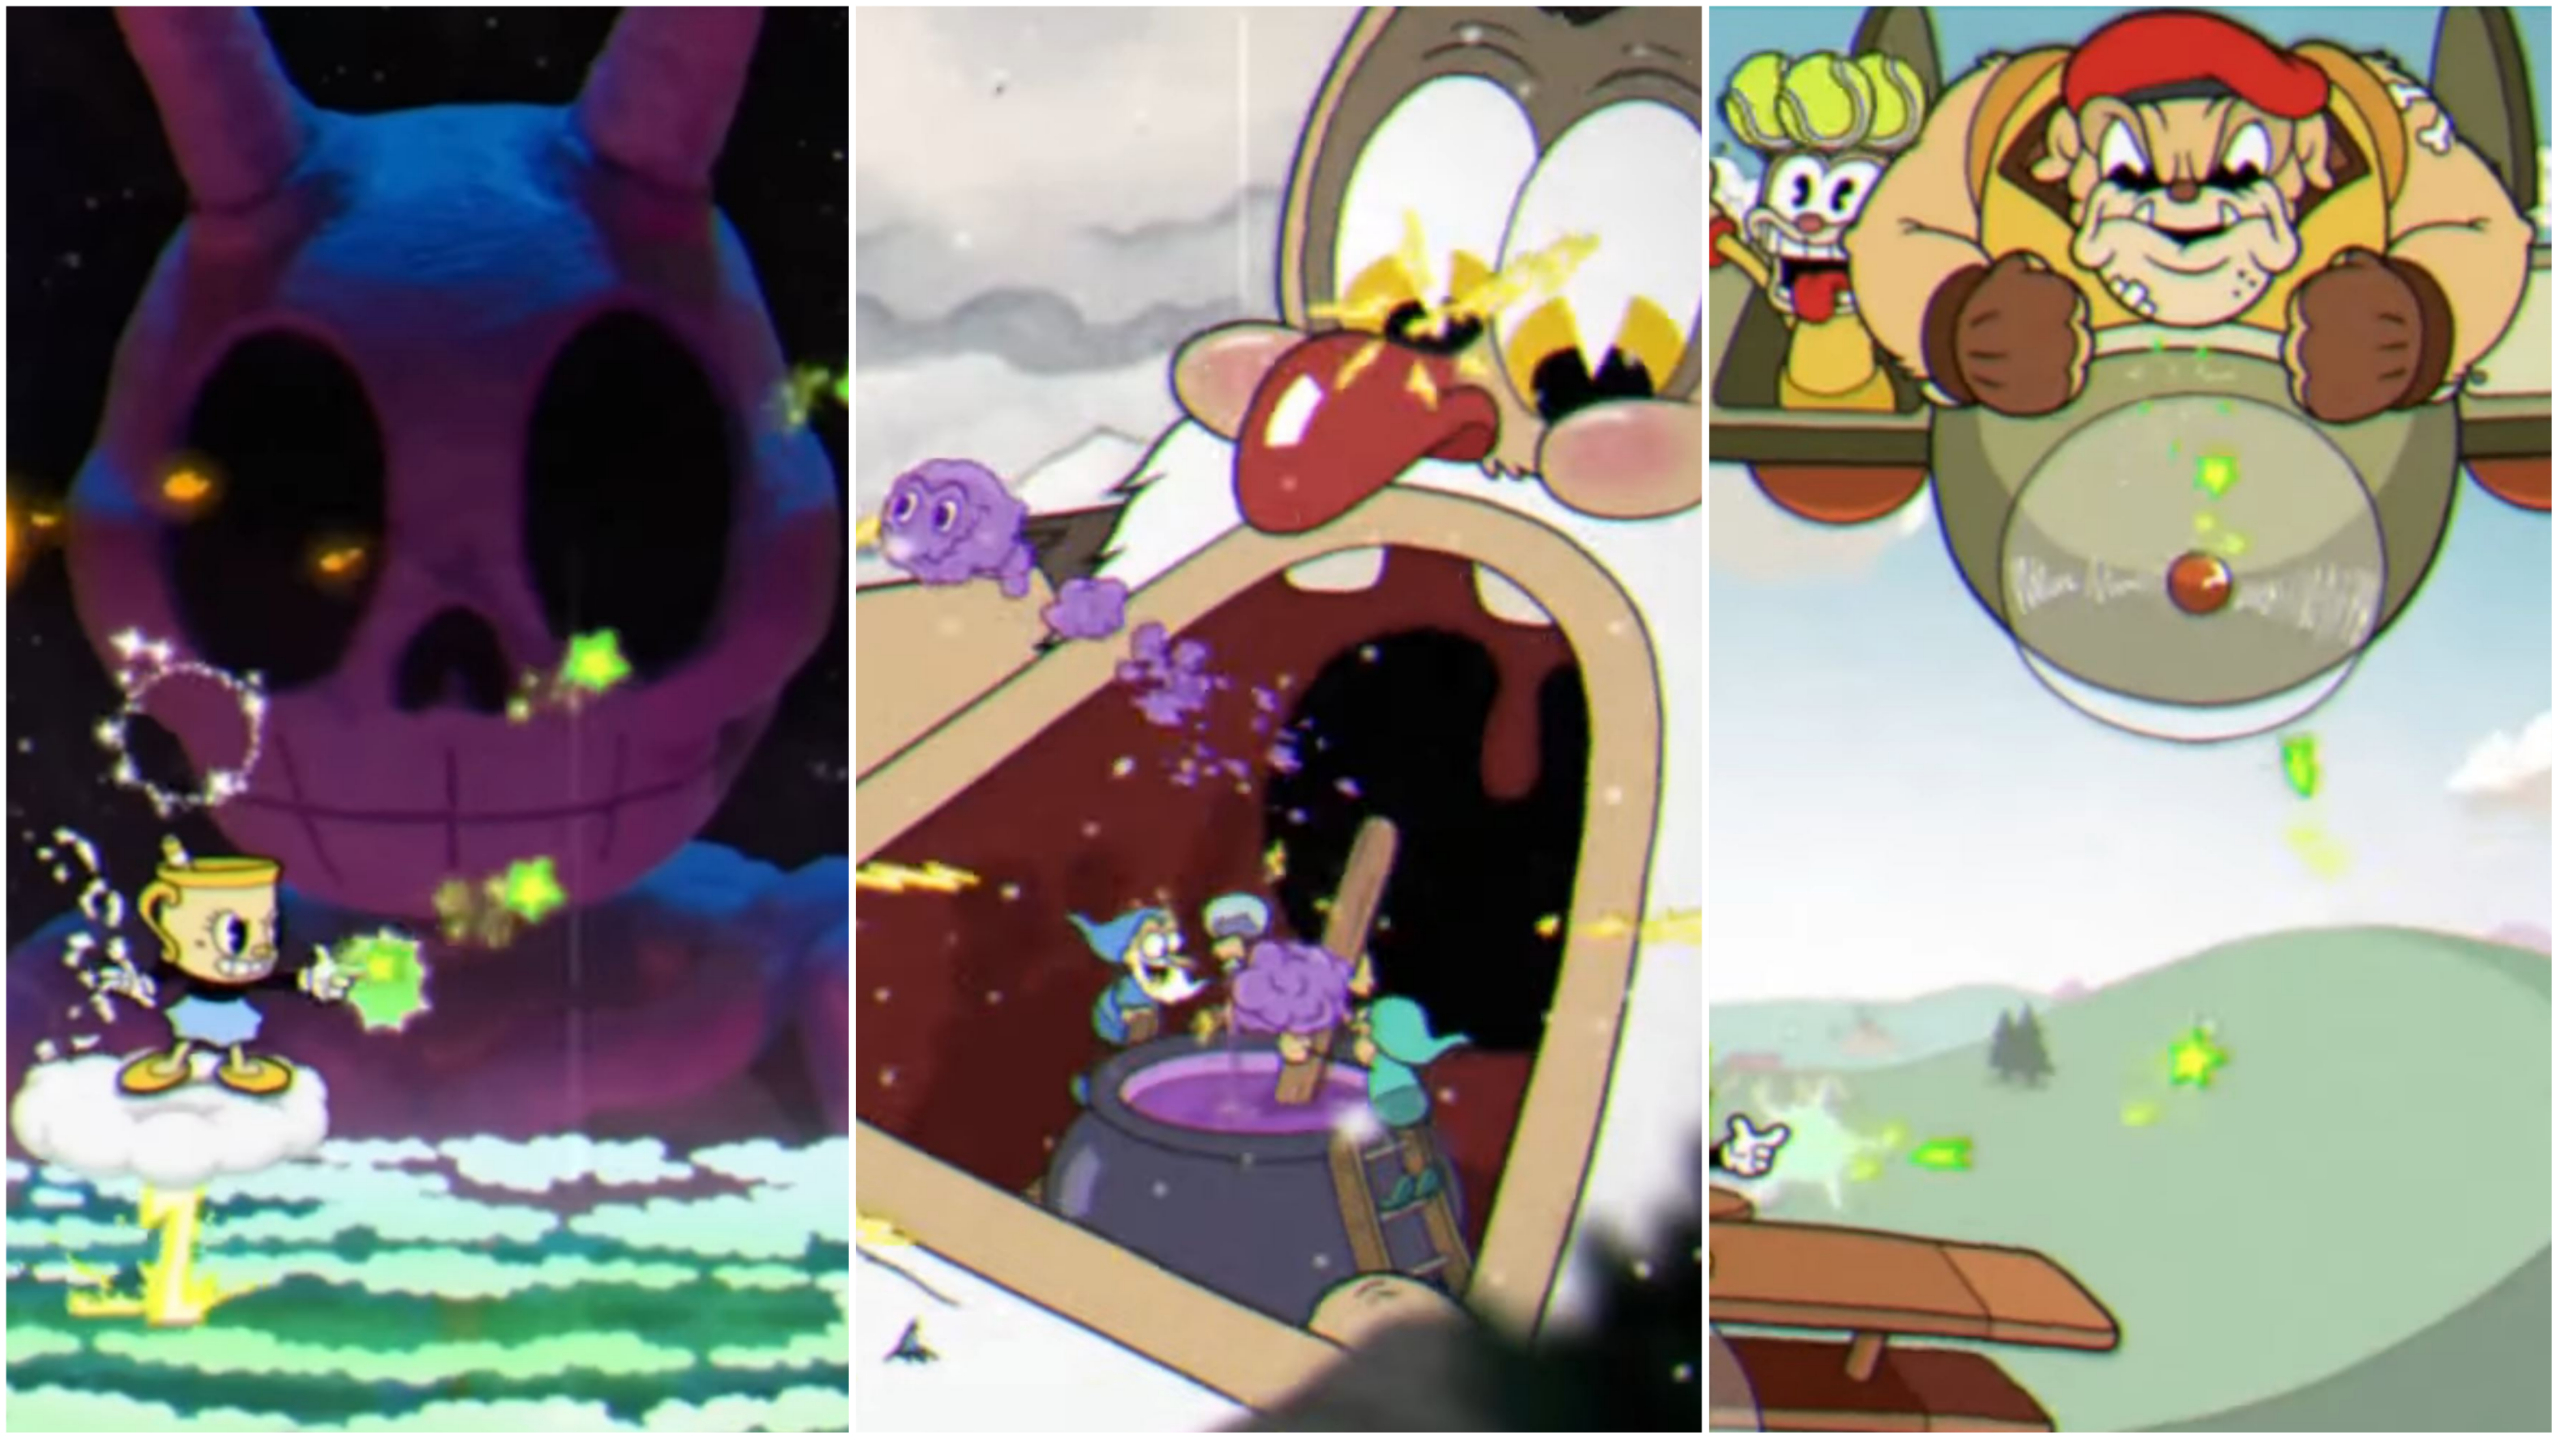 Cuphead' Bosses that Appear in 'The Cuphead Show!